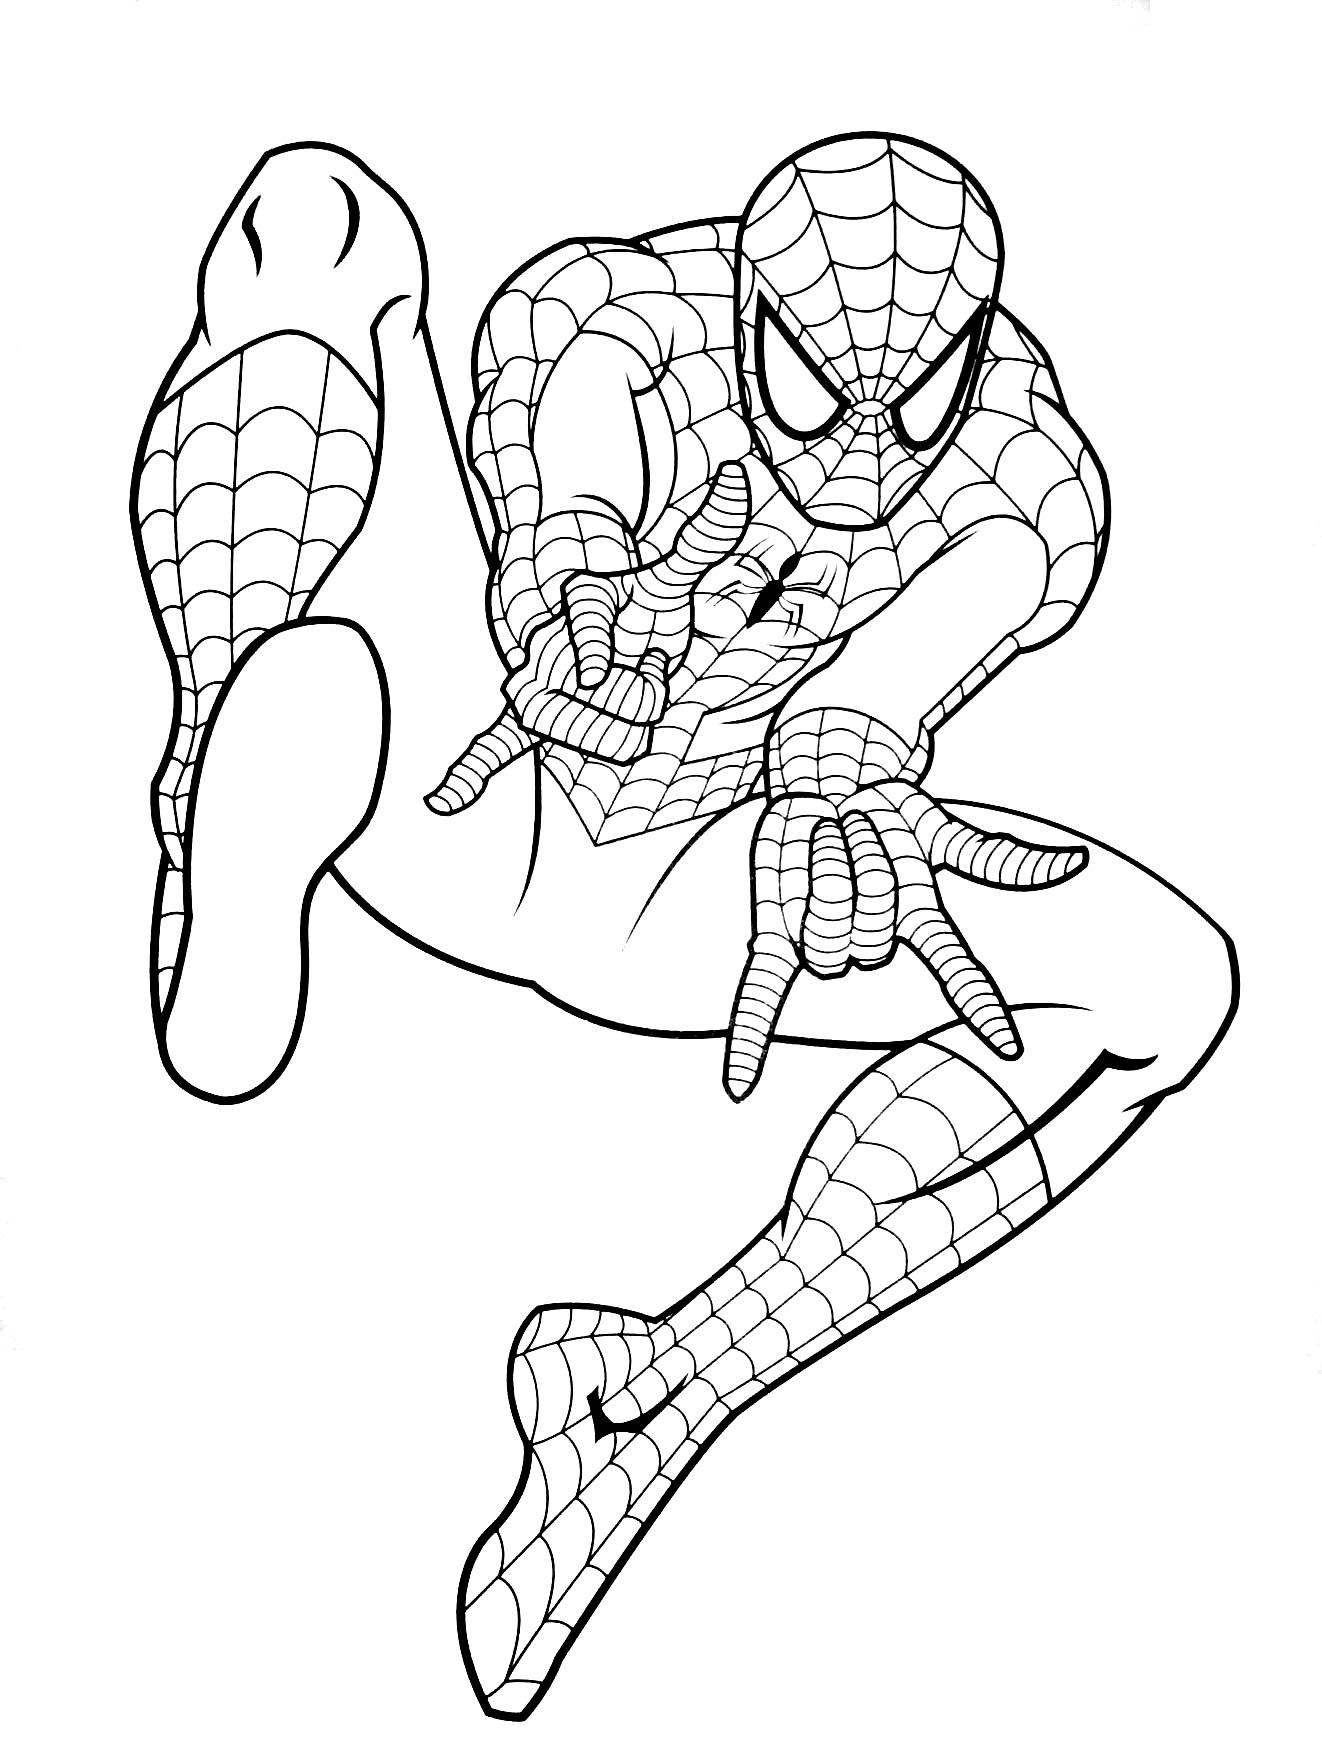 Download Spiderman to color for kids - Spiderman Kids Coloring Pages